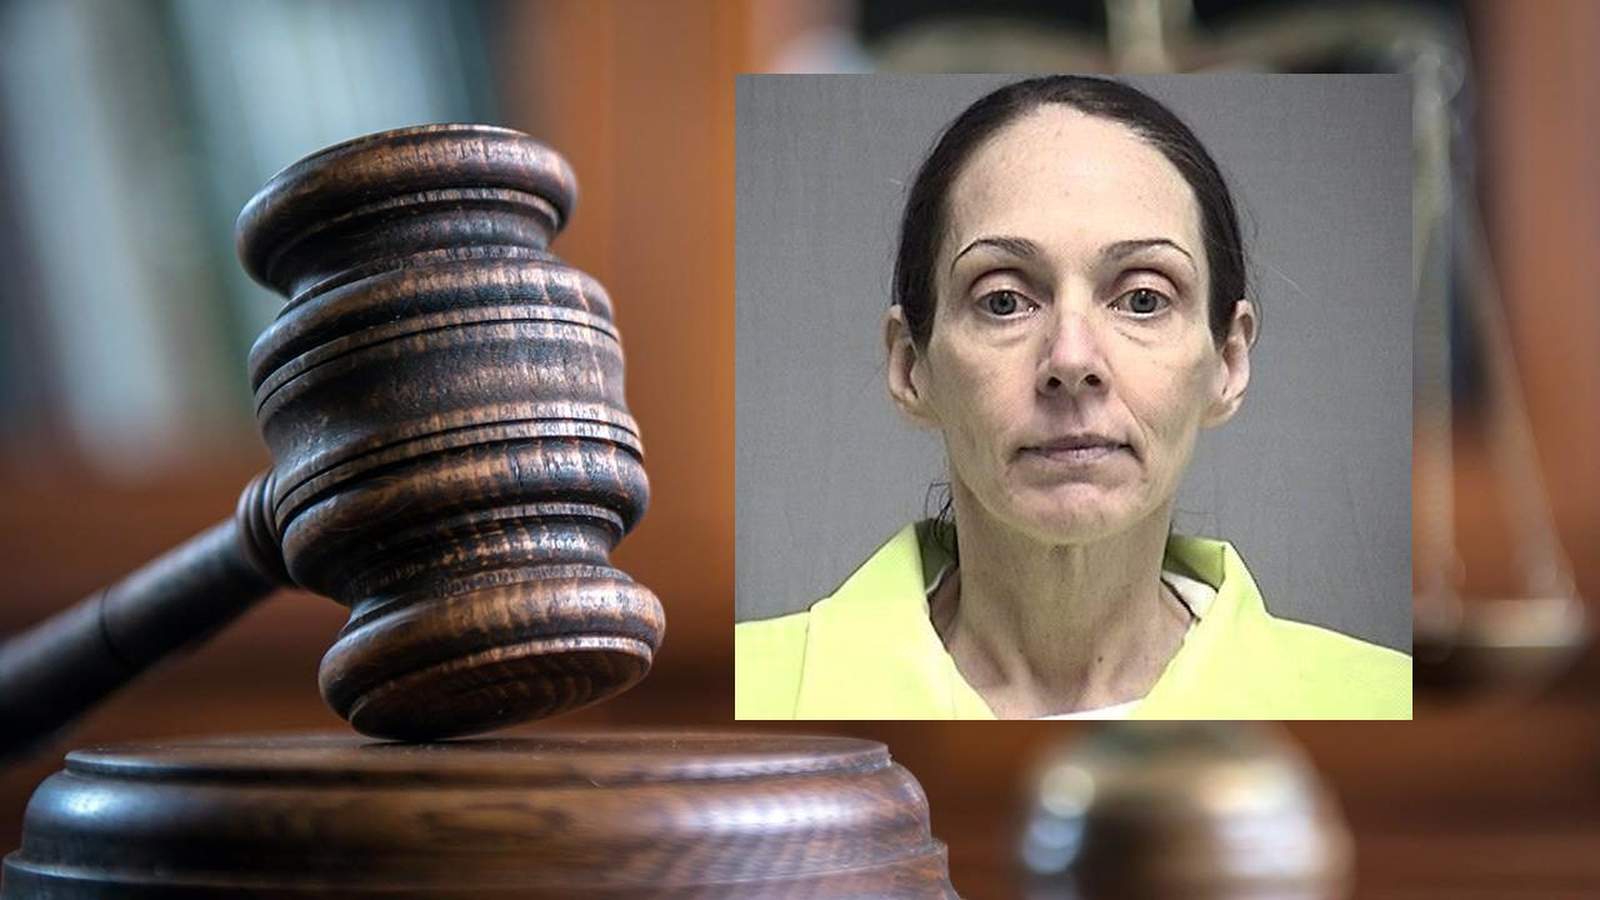 Judge orders Kimberly Kessler to have mental competency review